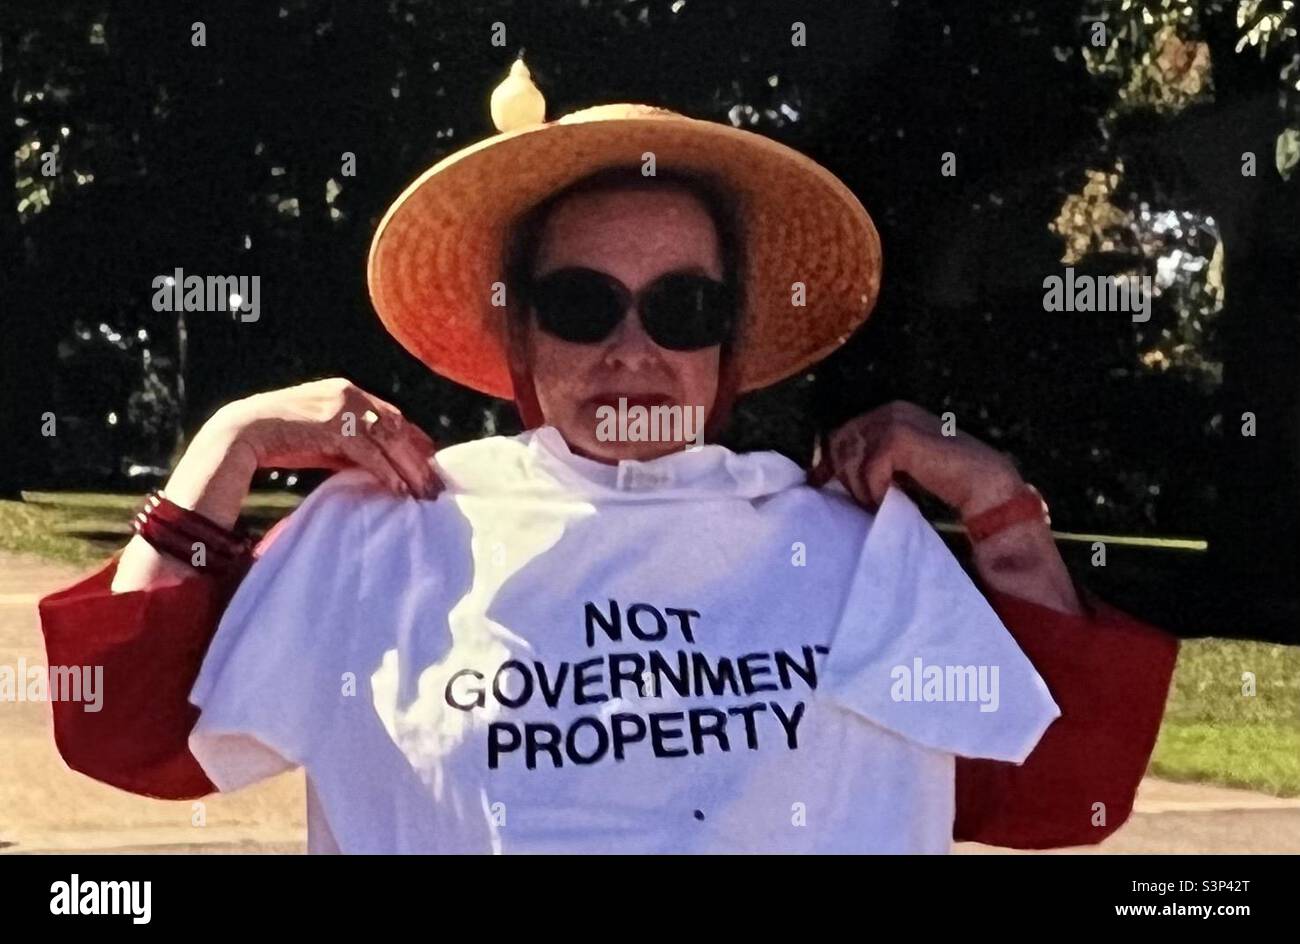 Woman at Ro choice rally Washington DC with “not government property” tshirt Stock Photo